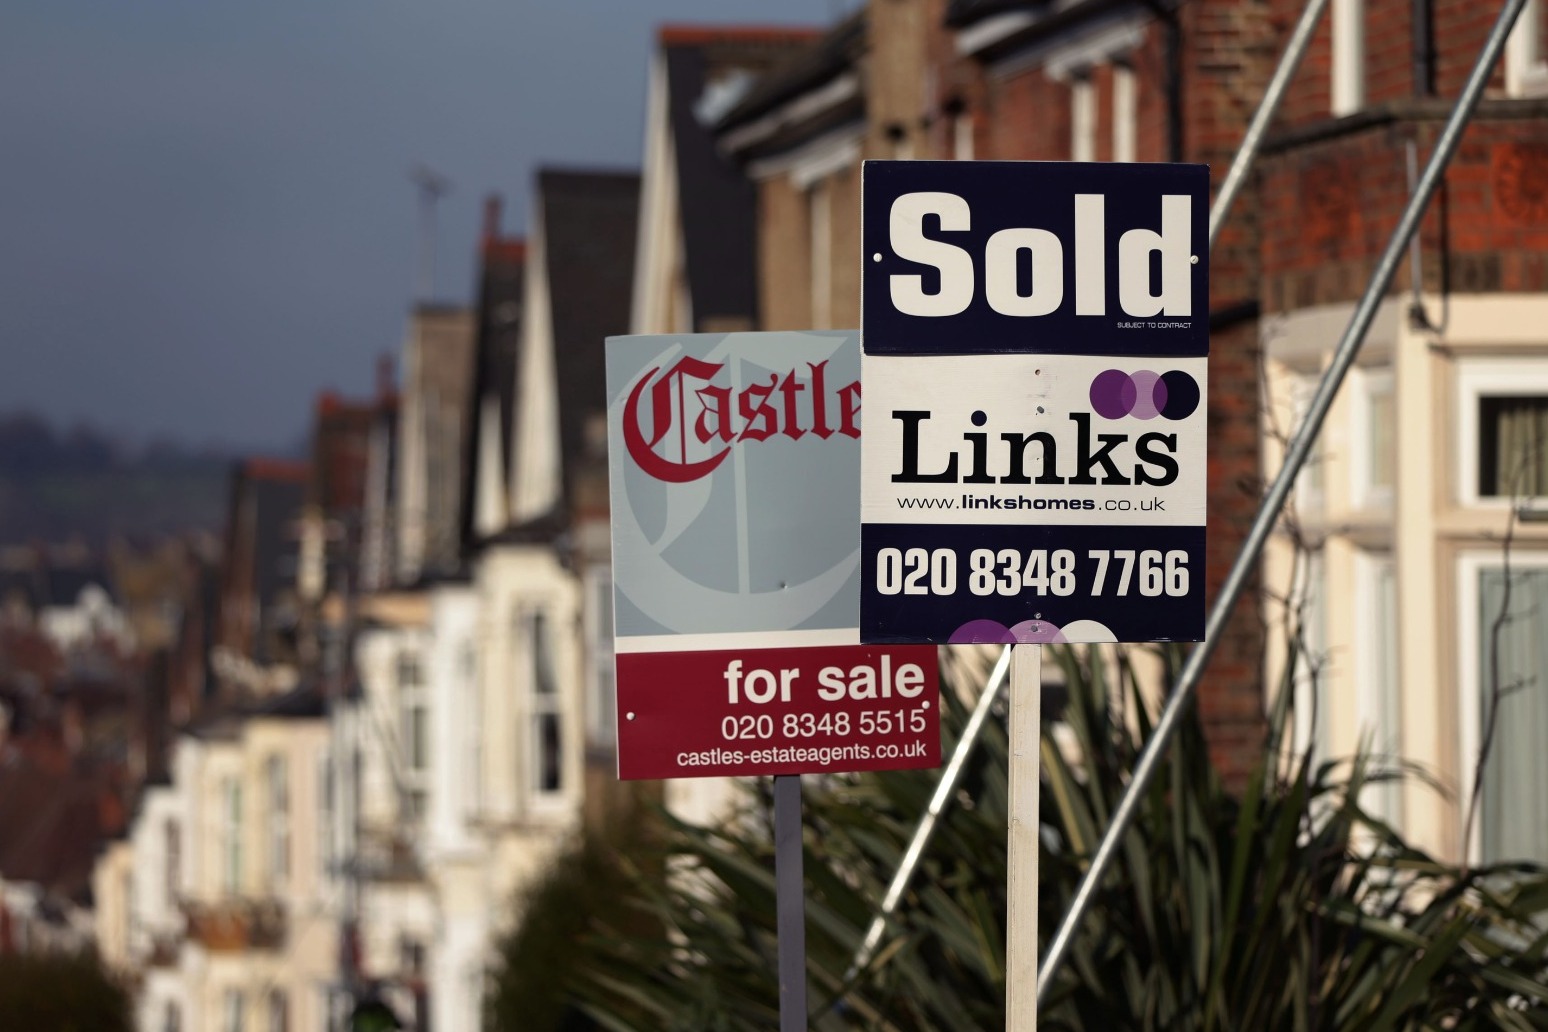 Annual house price growth not far off average UK earnings